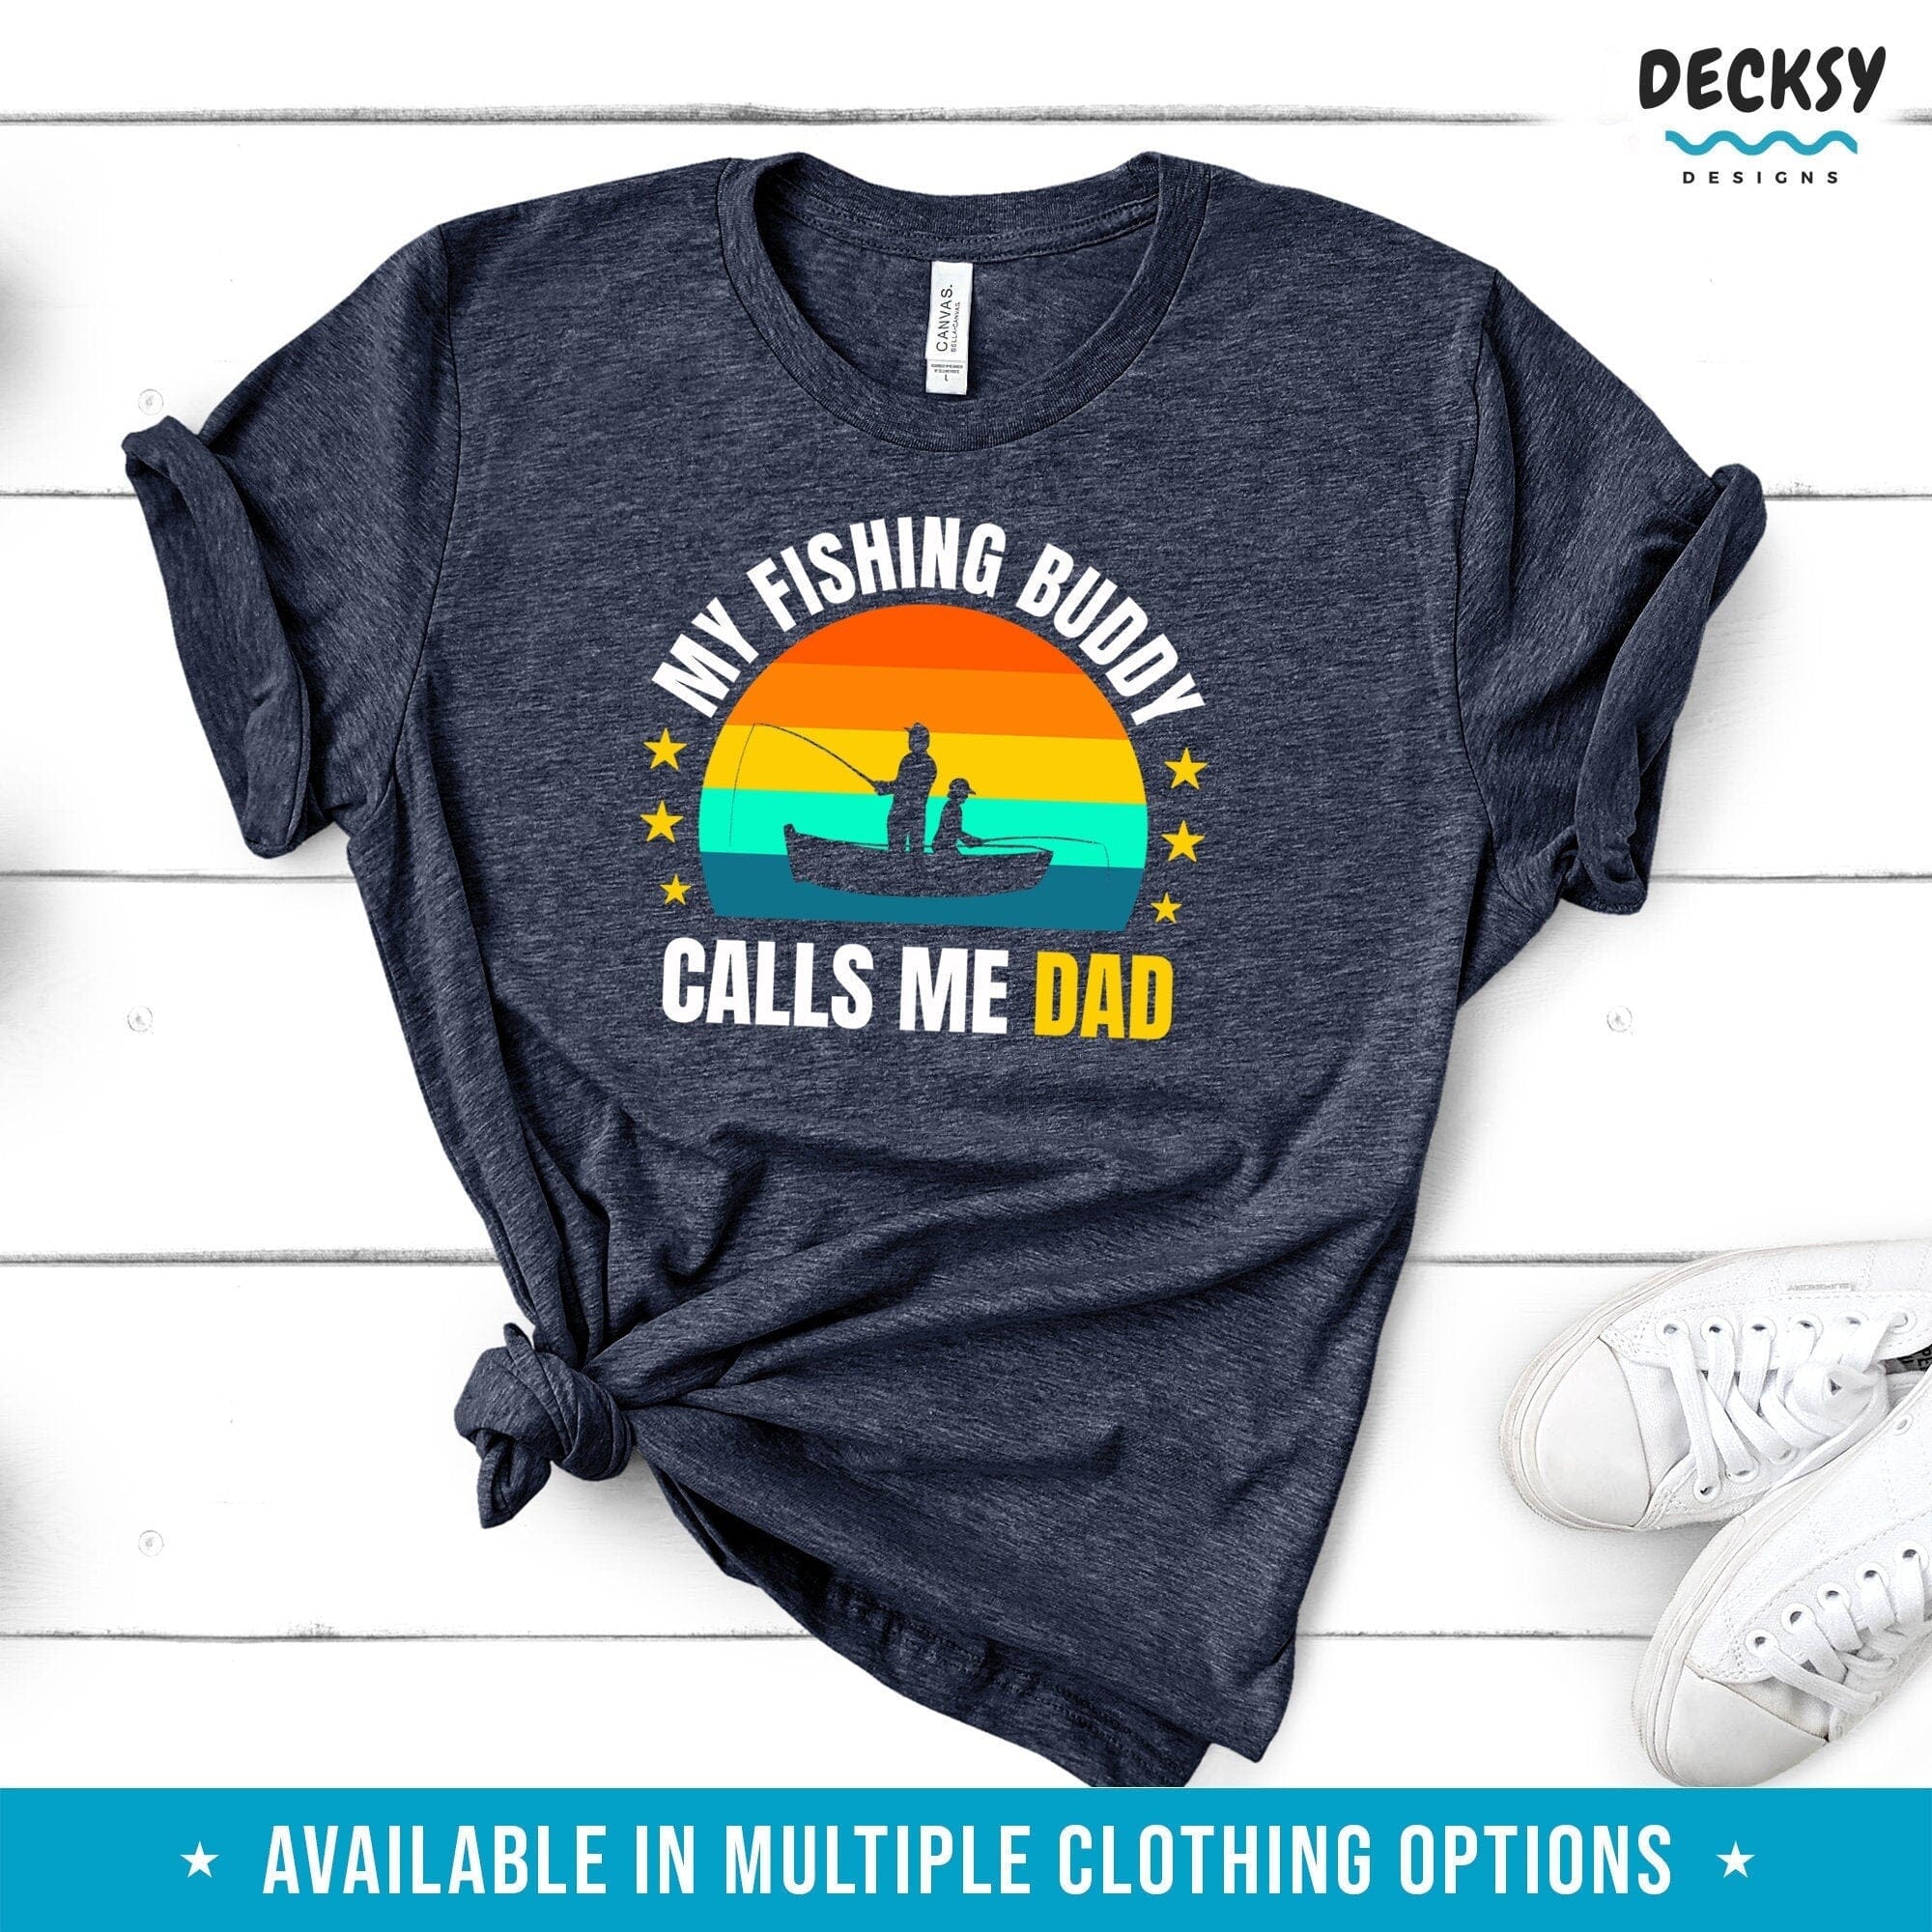 Dad and Son Fishing Shirt, Fishing Gift for Men-Clothing:Gender-Neutral Adult Clothing:Tops & Tees:T-shirts:Graphic Tees-DecksyDesigns